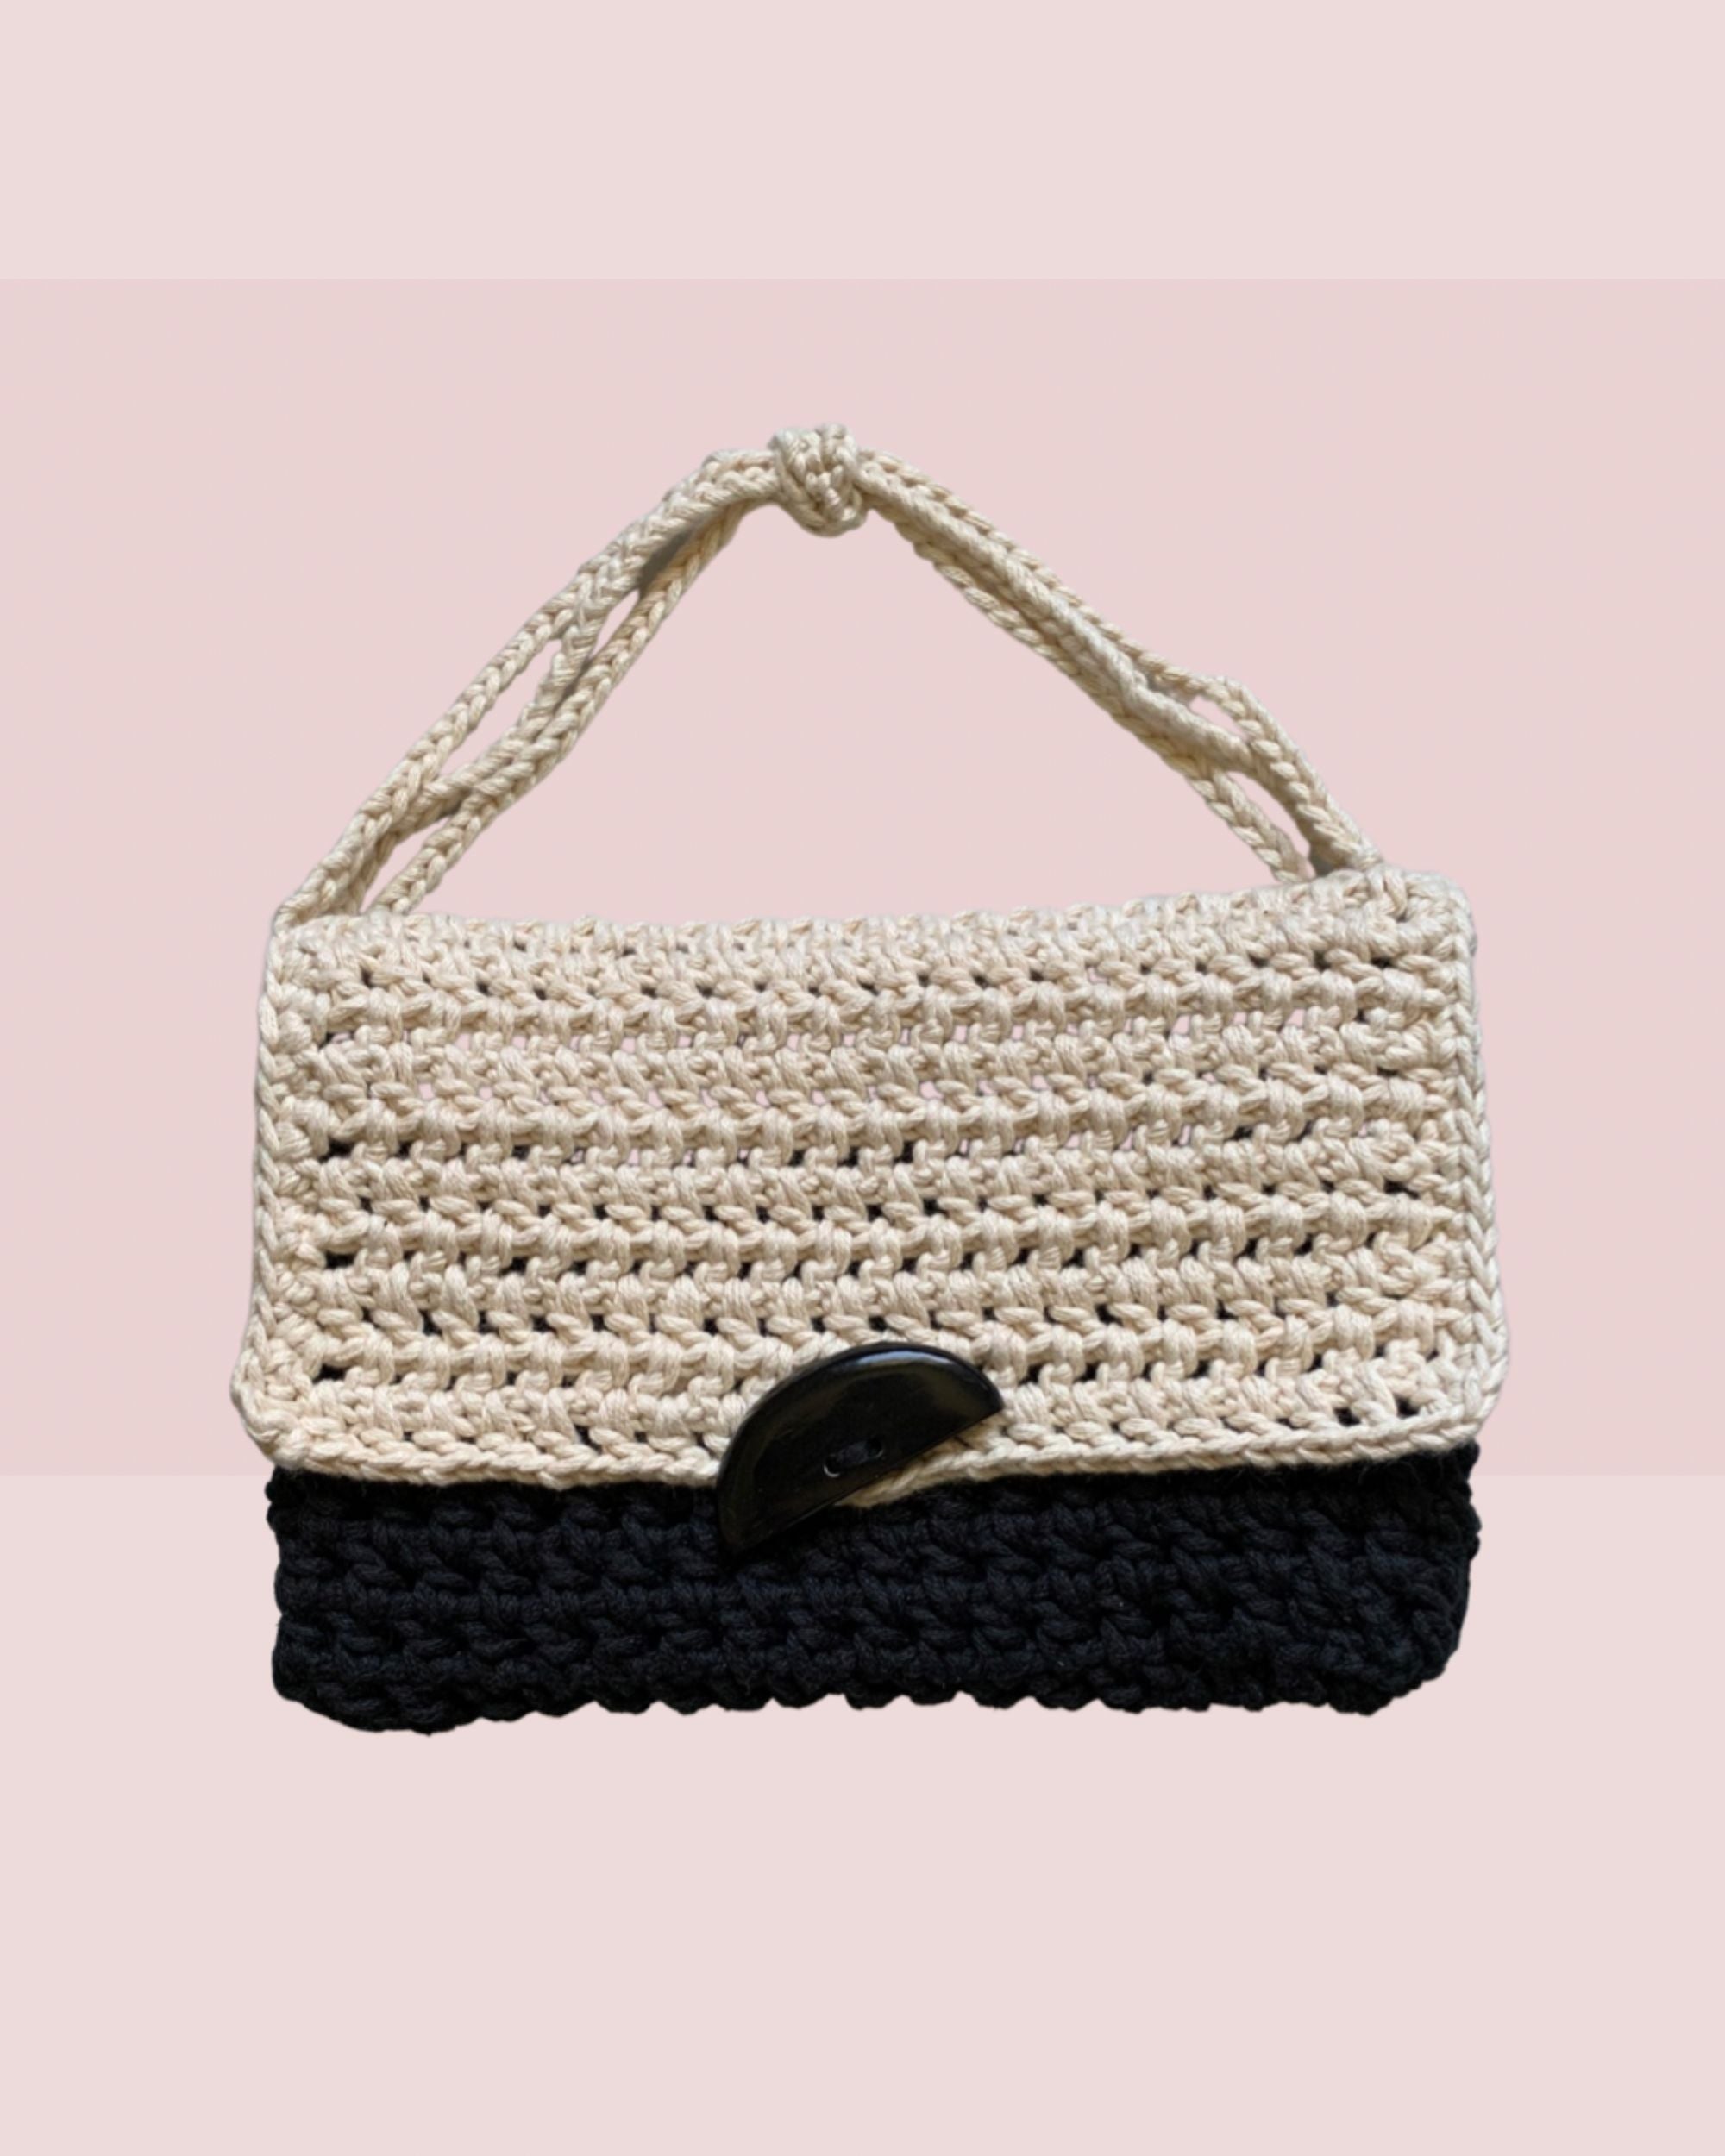 Mia Crocheted Clutch Bag with Handle in Black and Cream